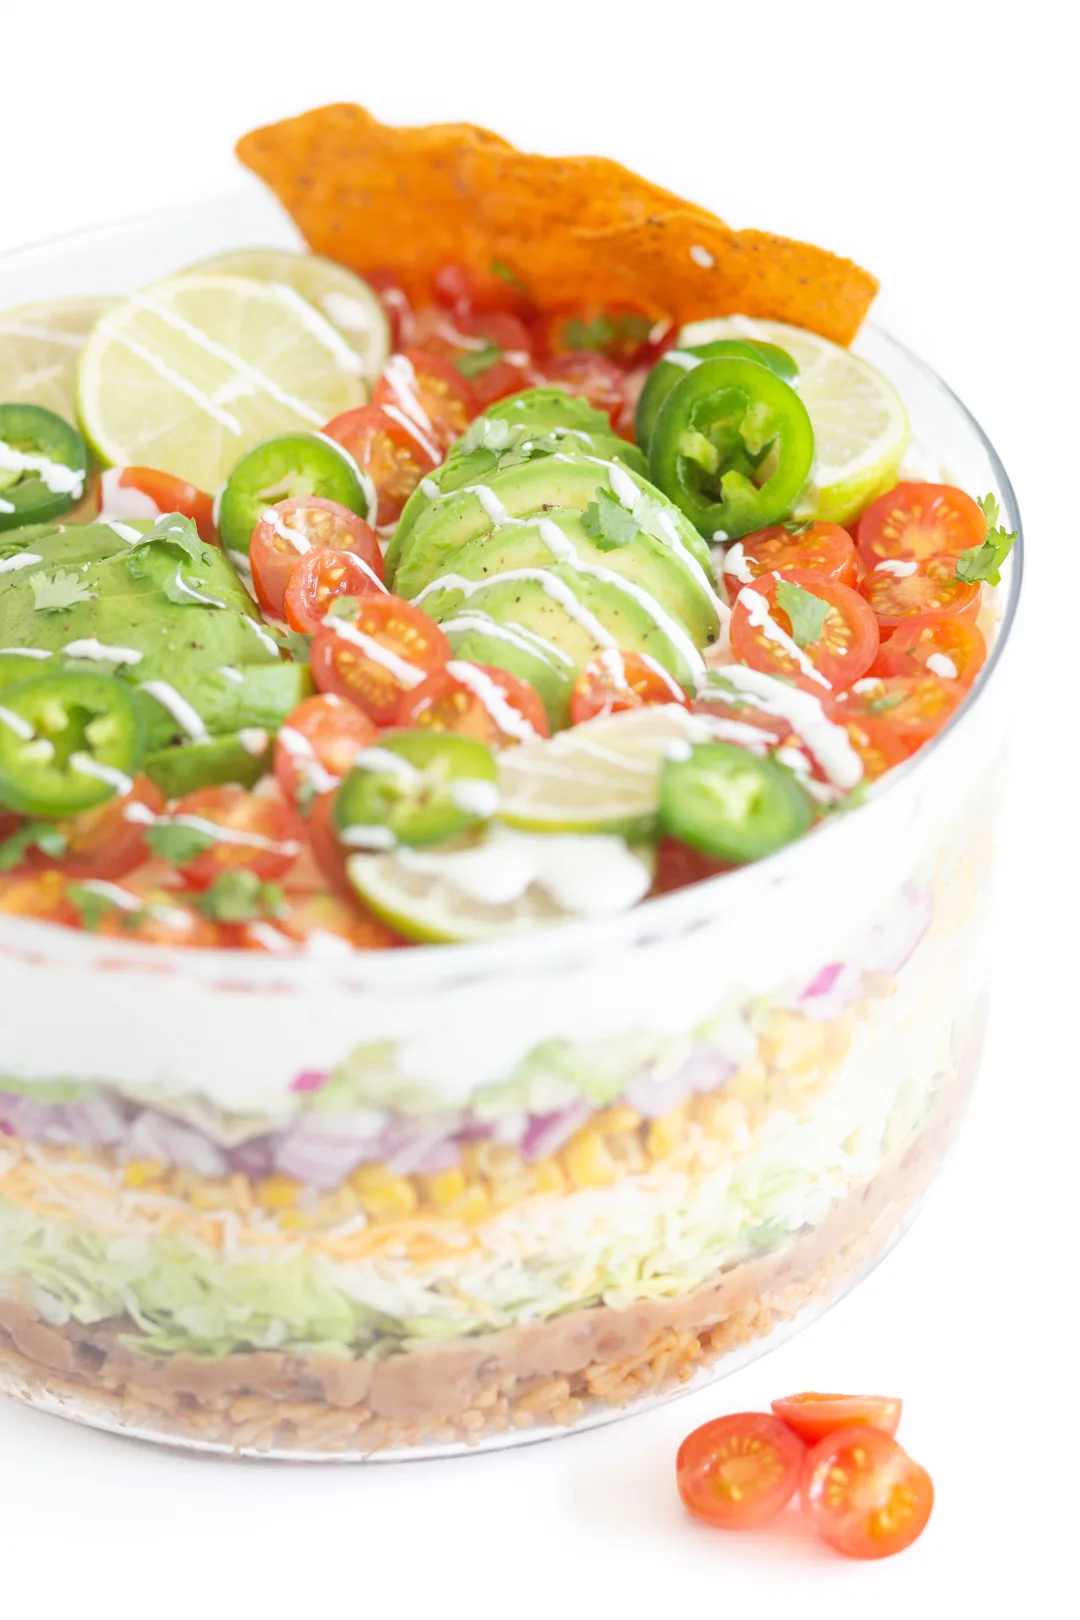 up close view of a pretty mexican layered salad topped with sliced avocado and halved cherry tomatoes, lime slices, cilantro